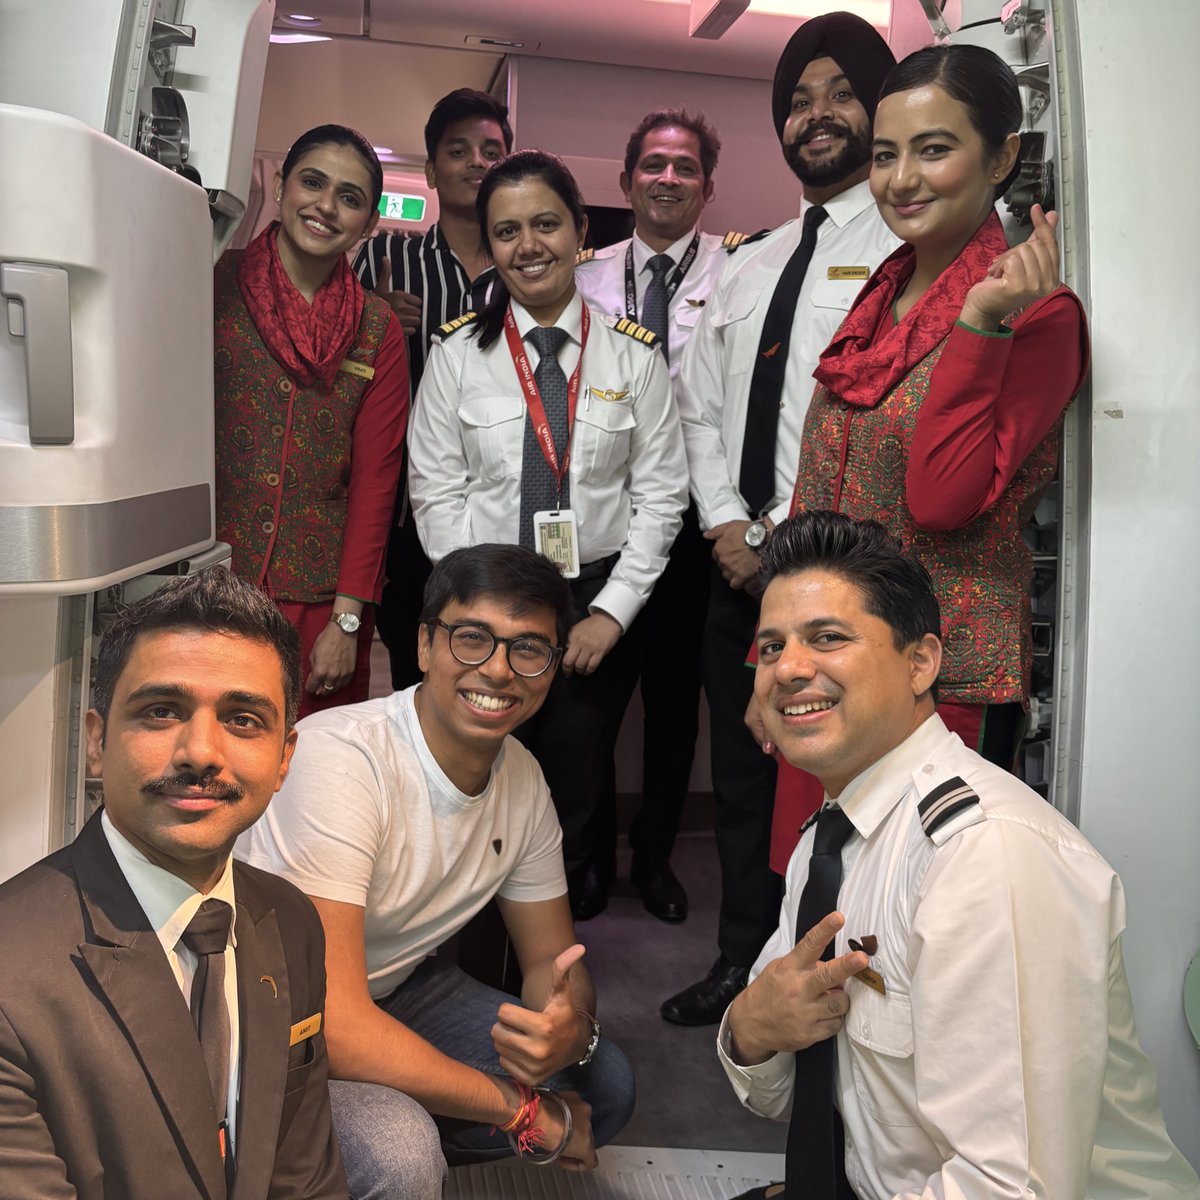 Yet another amazing flight on the brand new @Airbus A350-900 of @airindia!!! Thanks to the amazing set of crews onboard for making the flight a memorable one :)